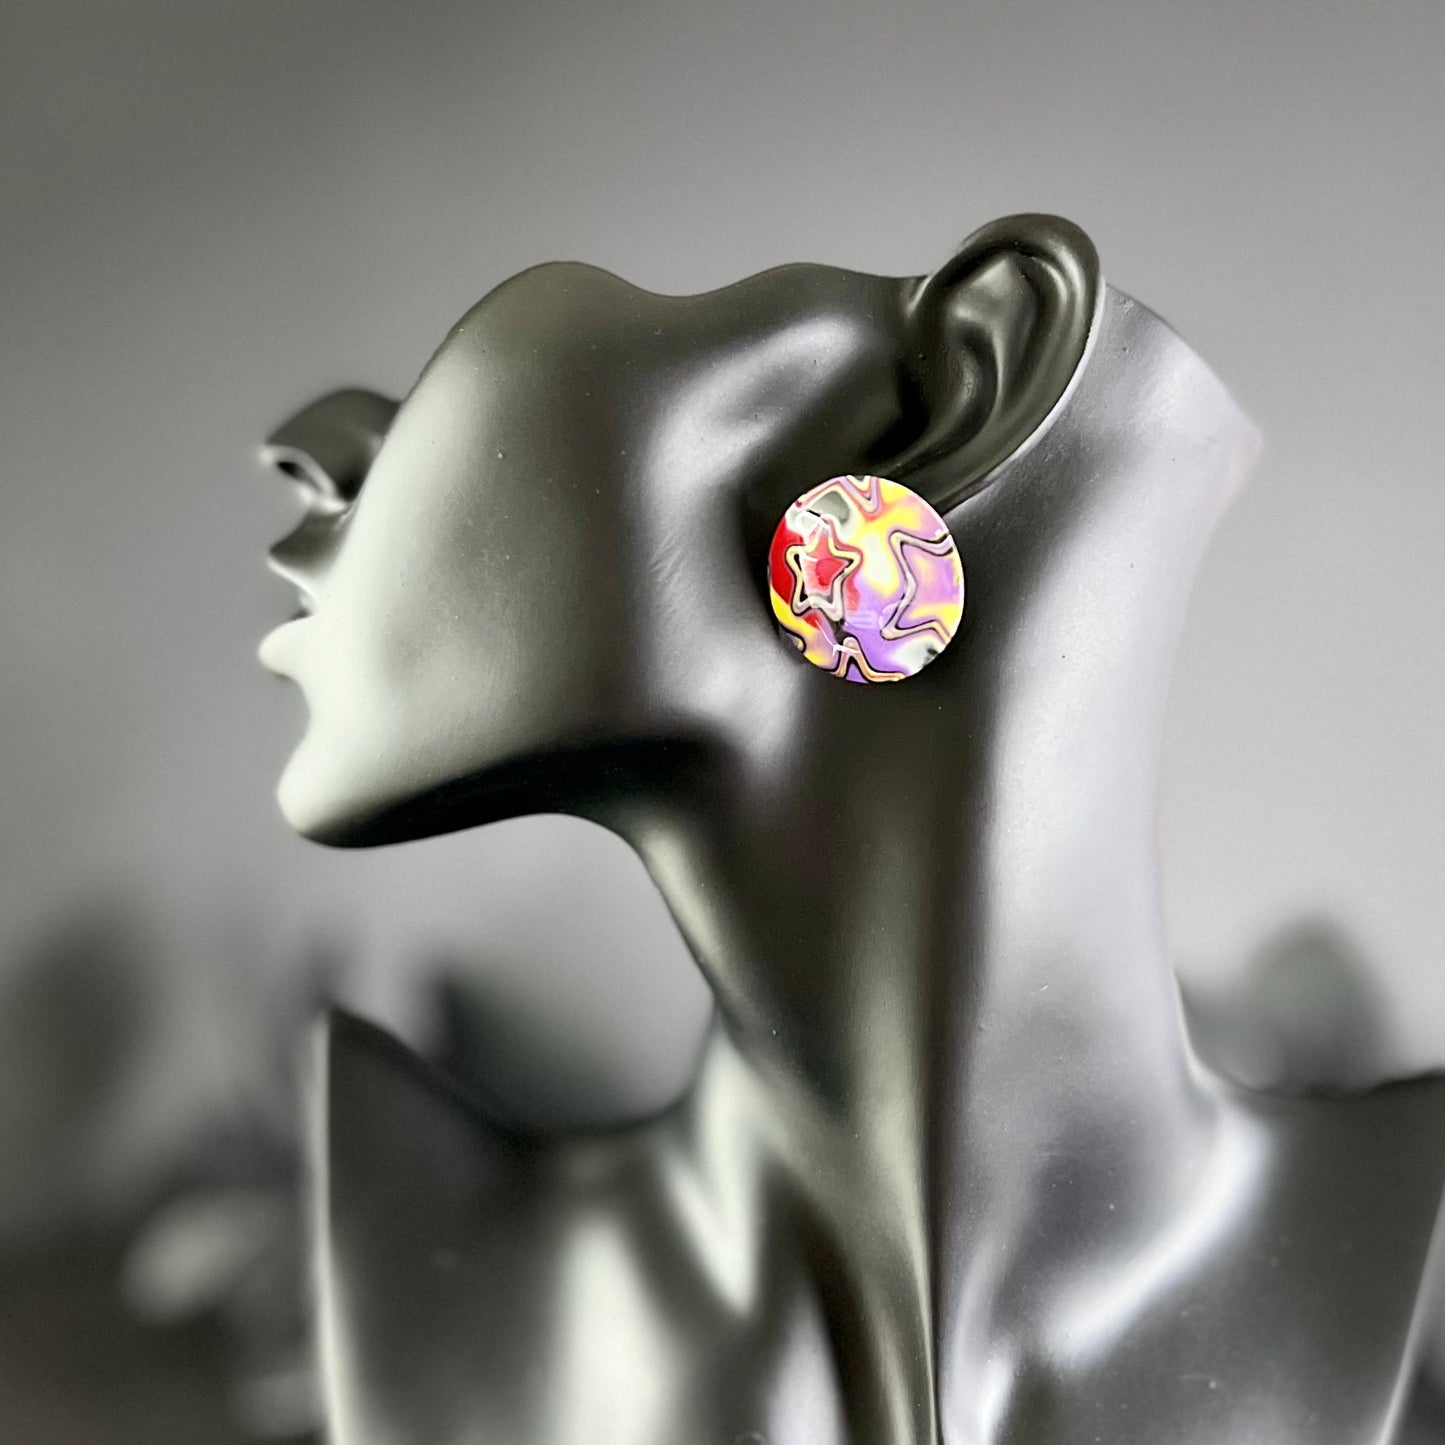 Large domed studs, psychedelic stars, red yellow purple, handmade earrings